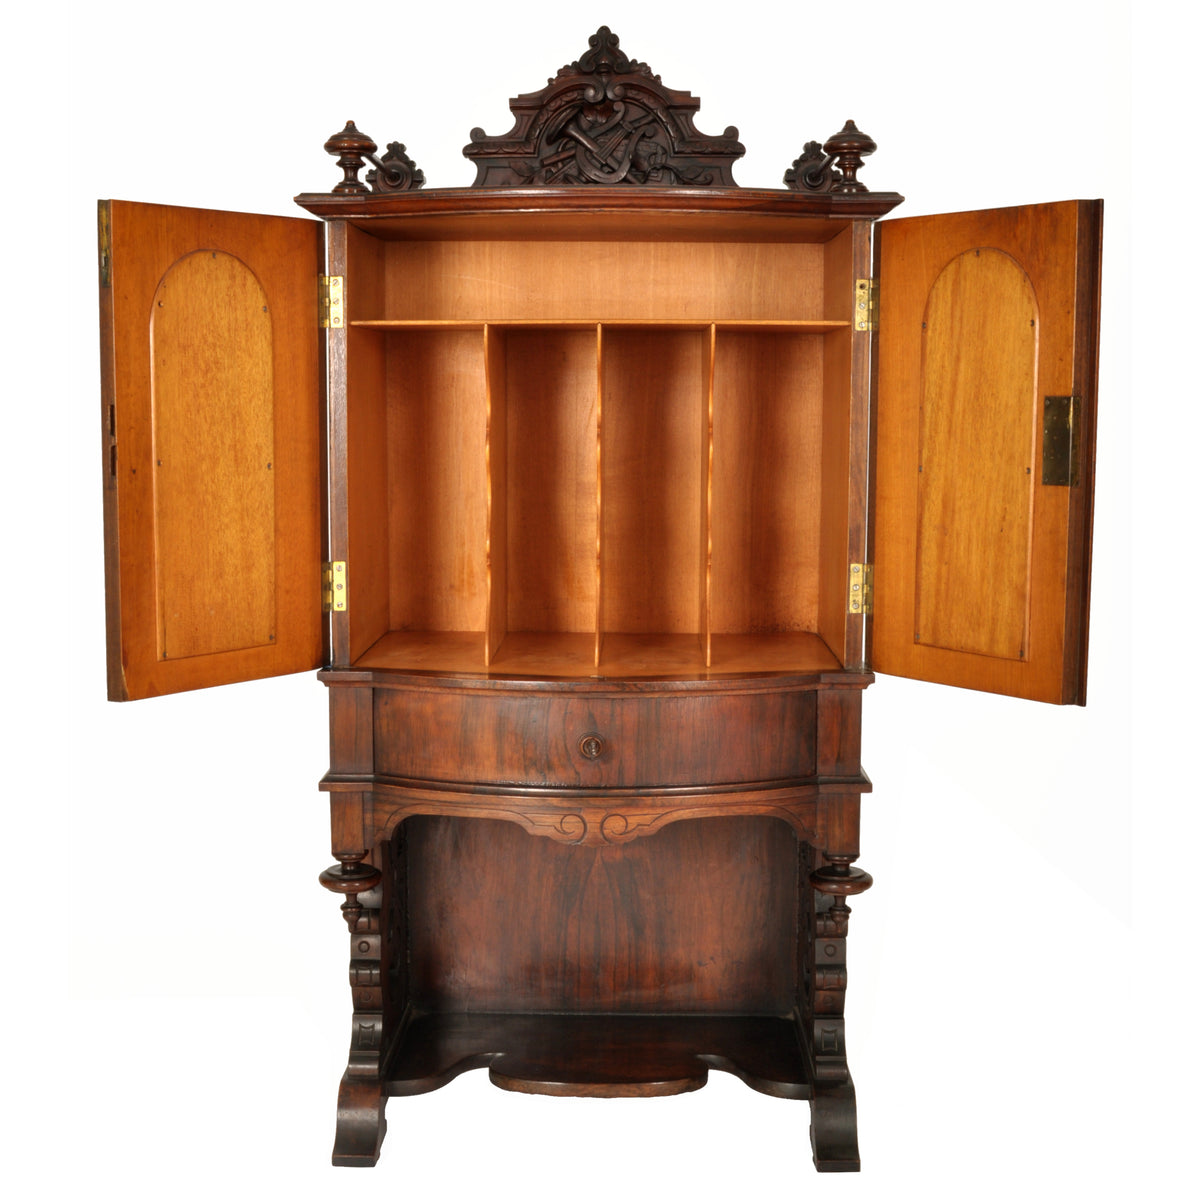 Antique American Renaissance Revival Carved Rosewood Music Cabinet, circa 1870